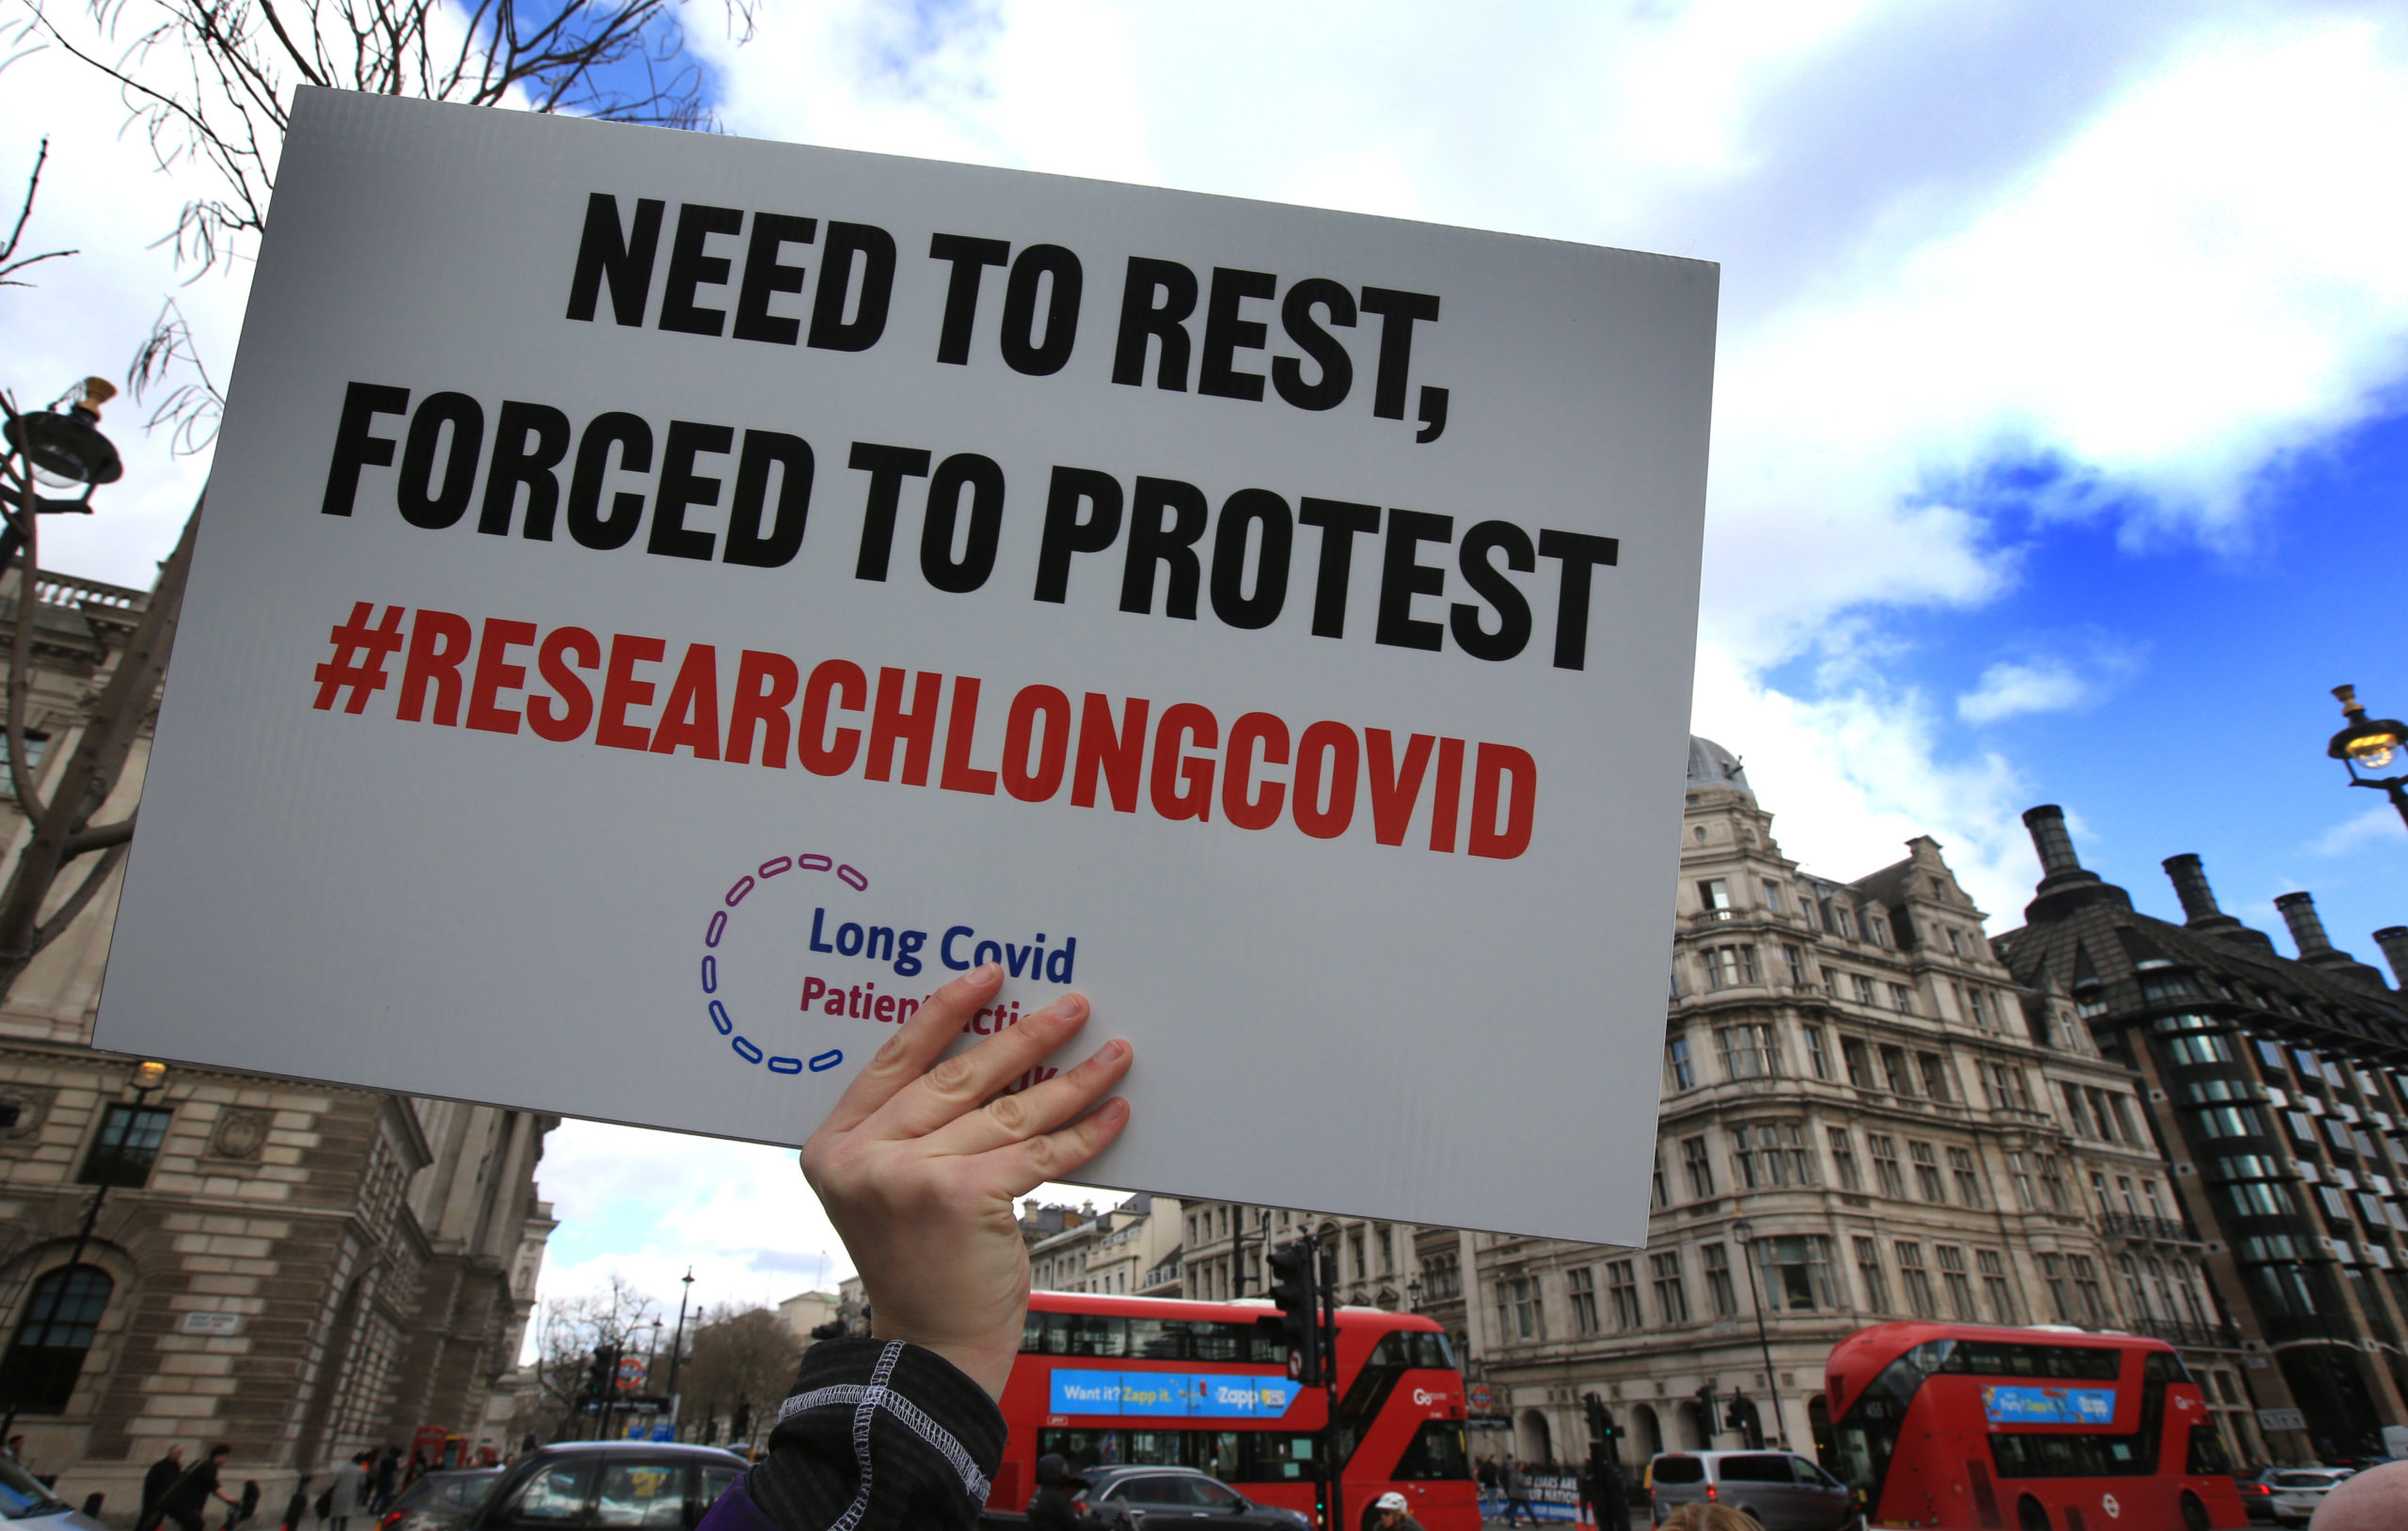 A protester holds up a placard demanding research into Long